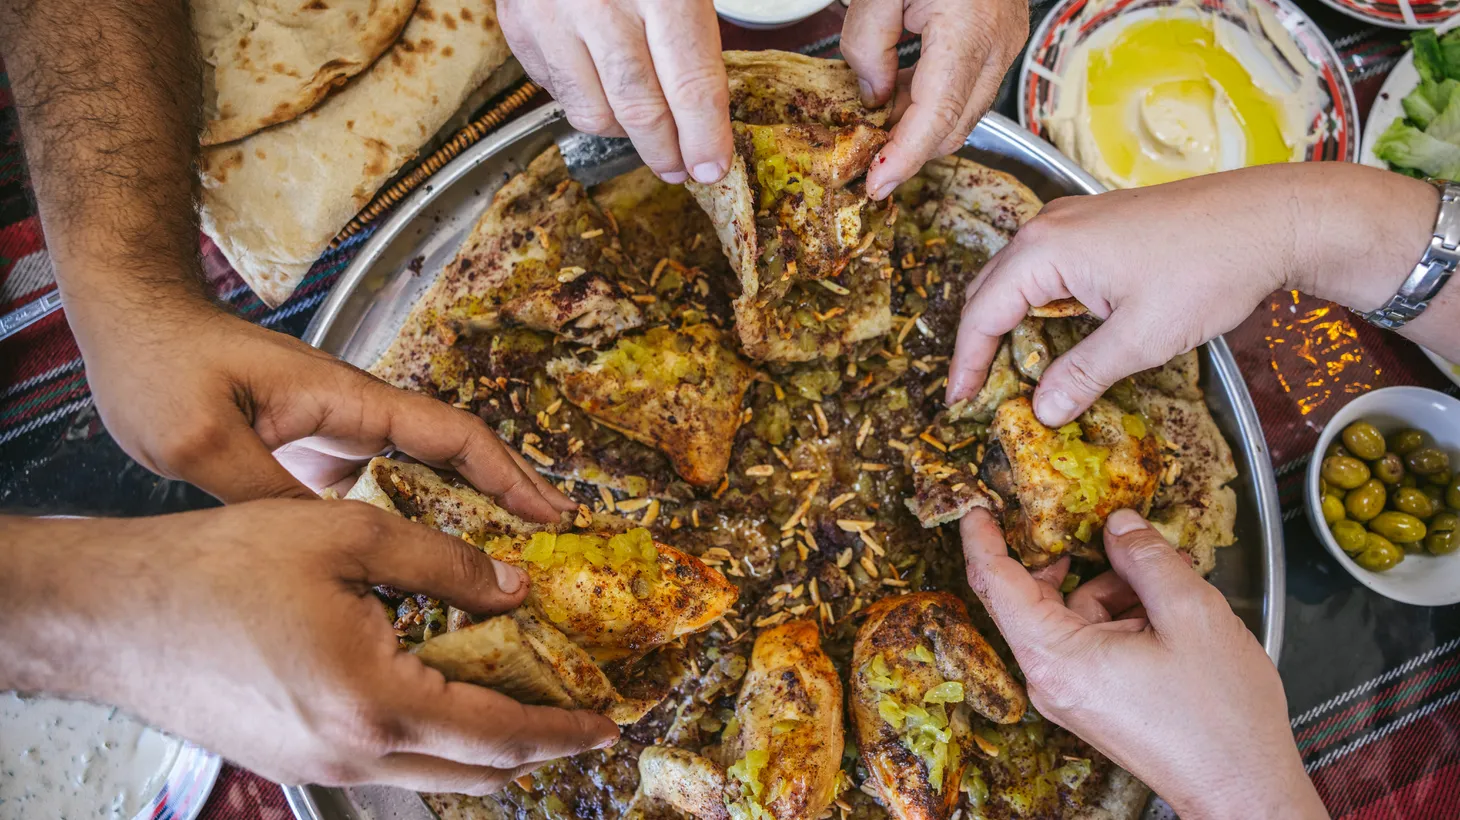 A shared table is emblematic of Palestinian cuisine, which chef Fadi Kattan wants to share with the rest of the world.